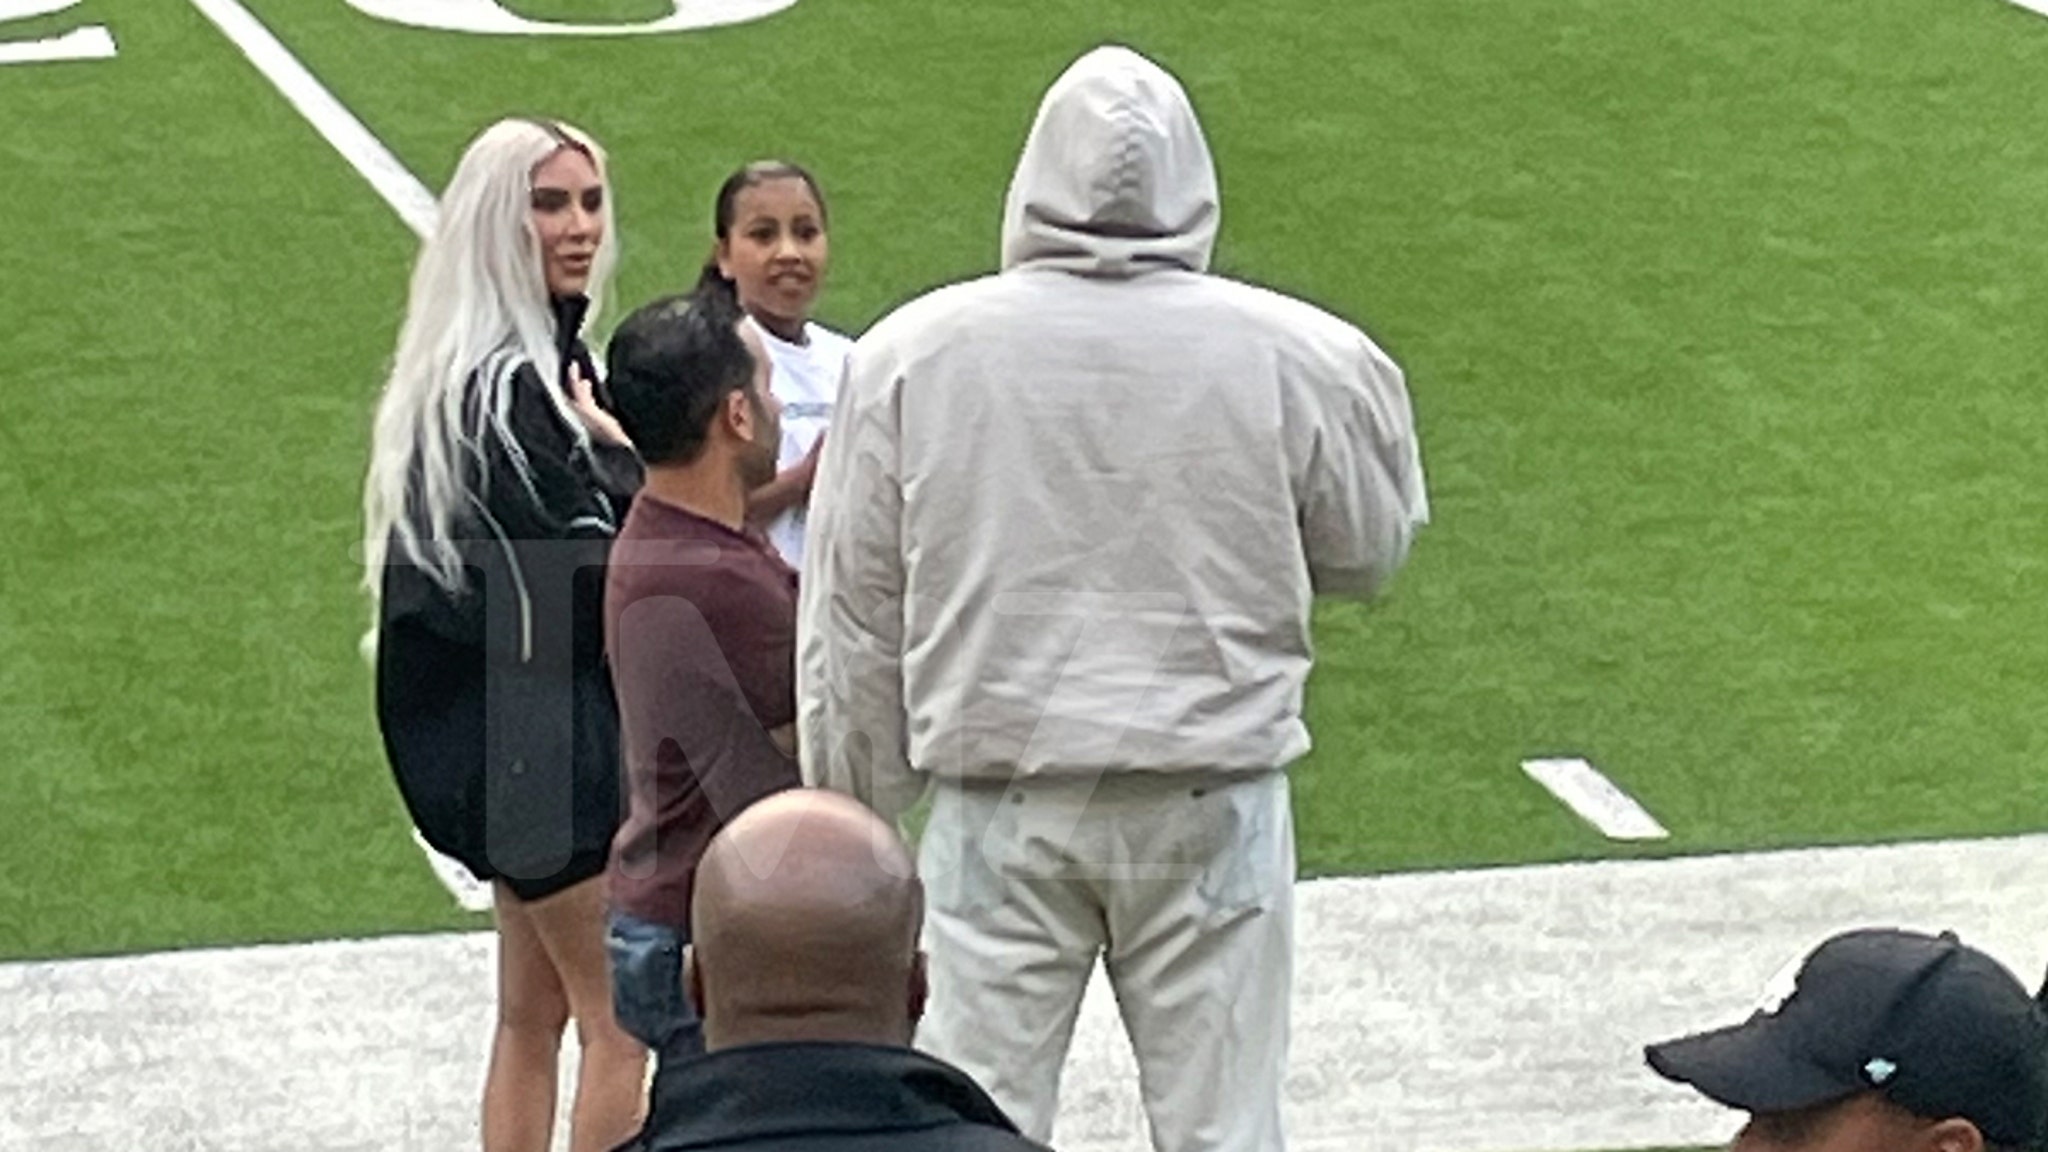 Kim Kardashian and Kanye West Attend Saint’s Football Game, Chat on Sidelines